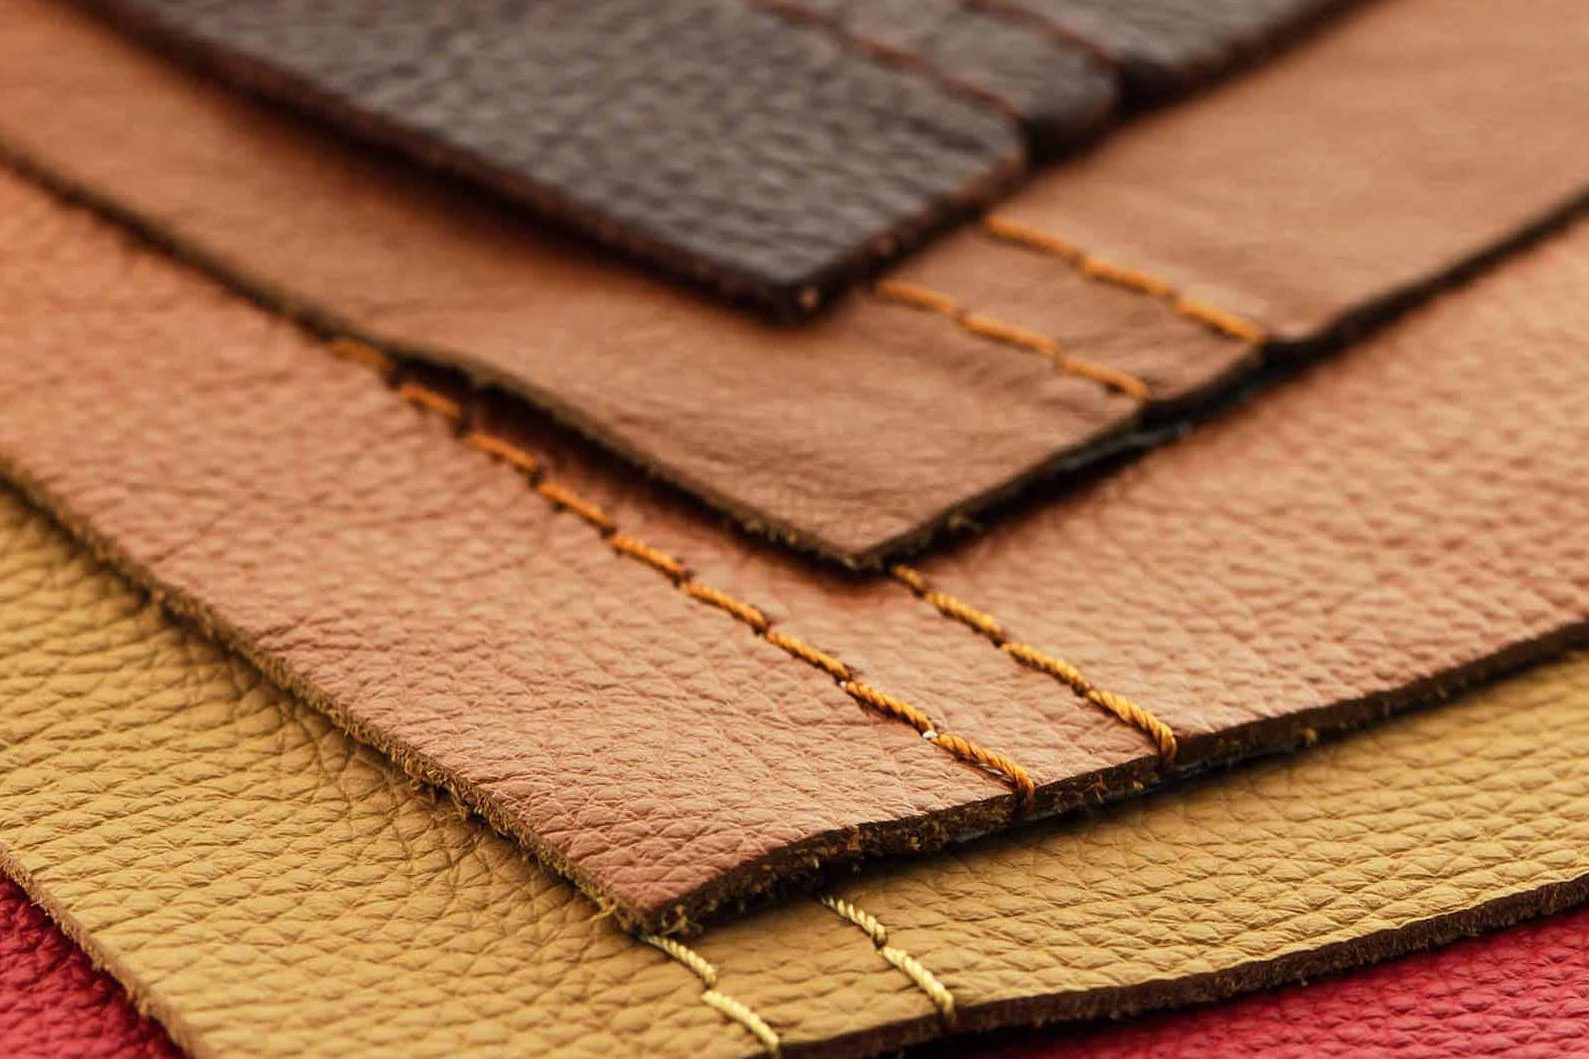 Buy bonded leather | Selling All Types of bonded leather At a Reasonable Price